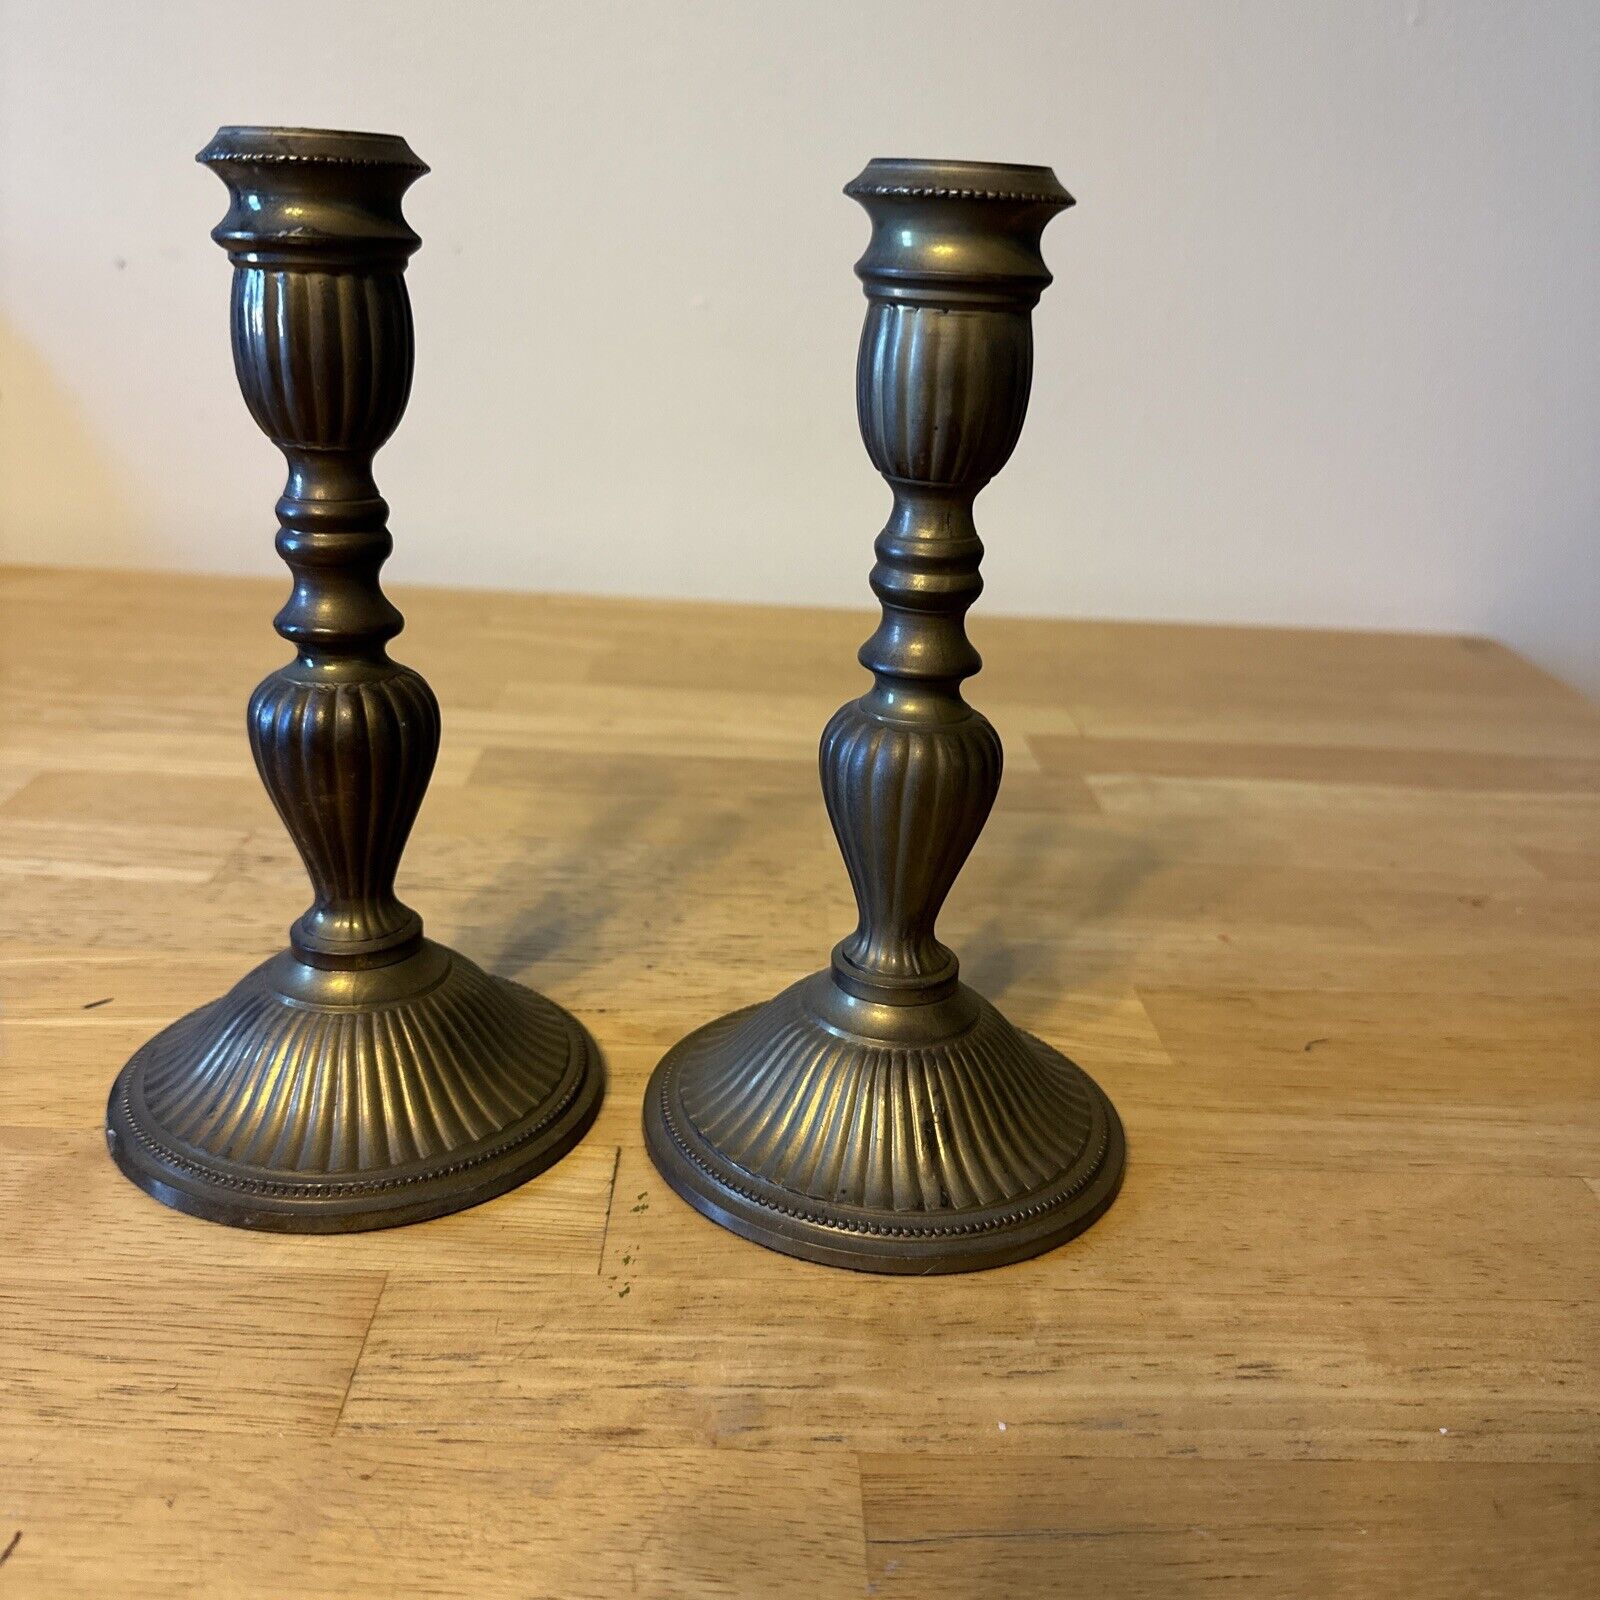 Two Solid Brass Candlestick Holders Vintage Made In India